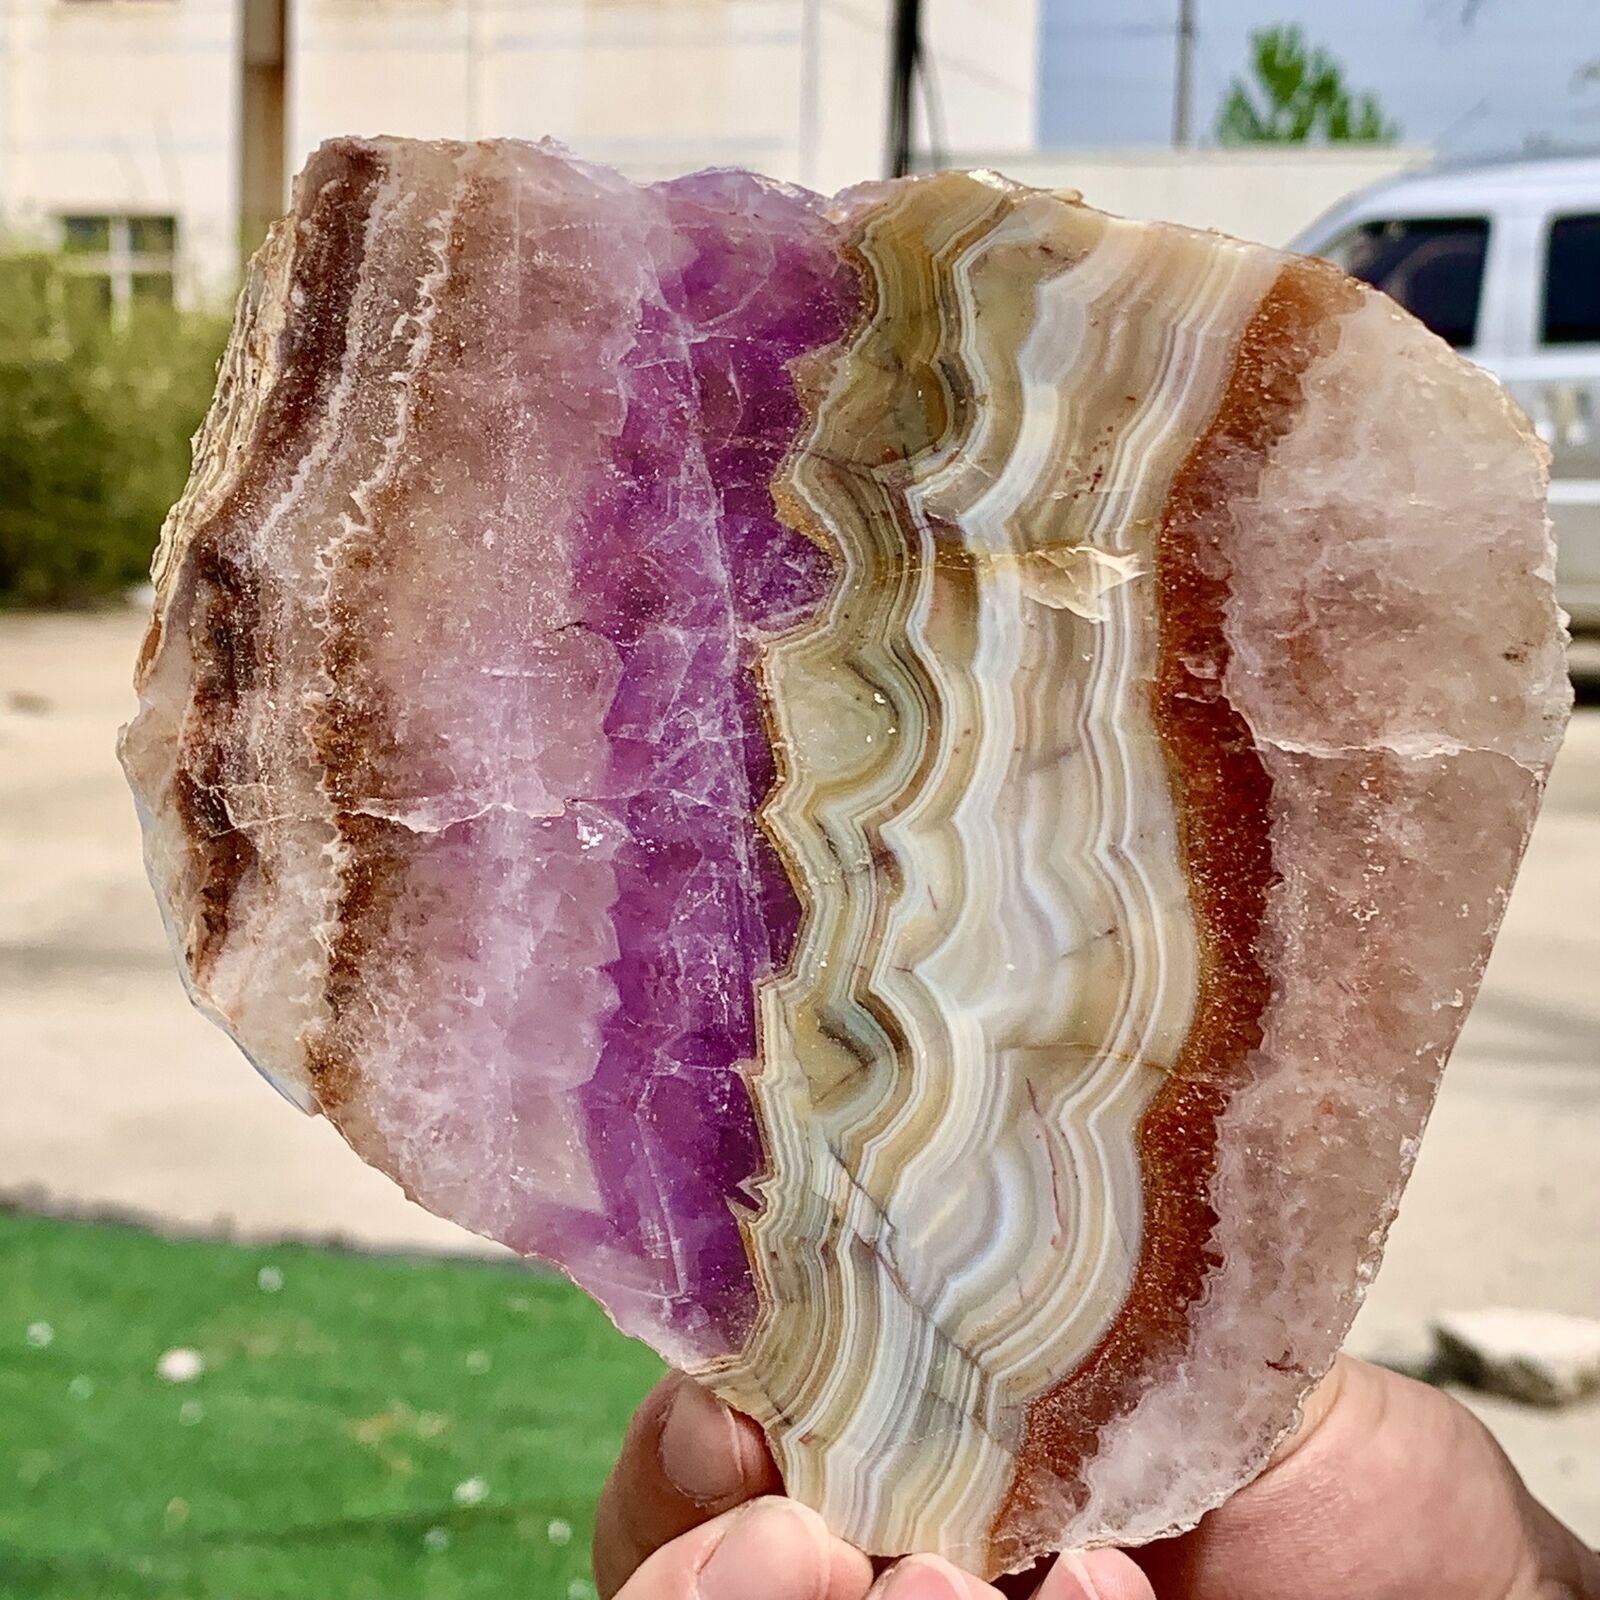 308G Natural and beautiful dreamy amethyst rough stone specimen